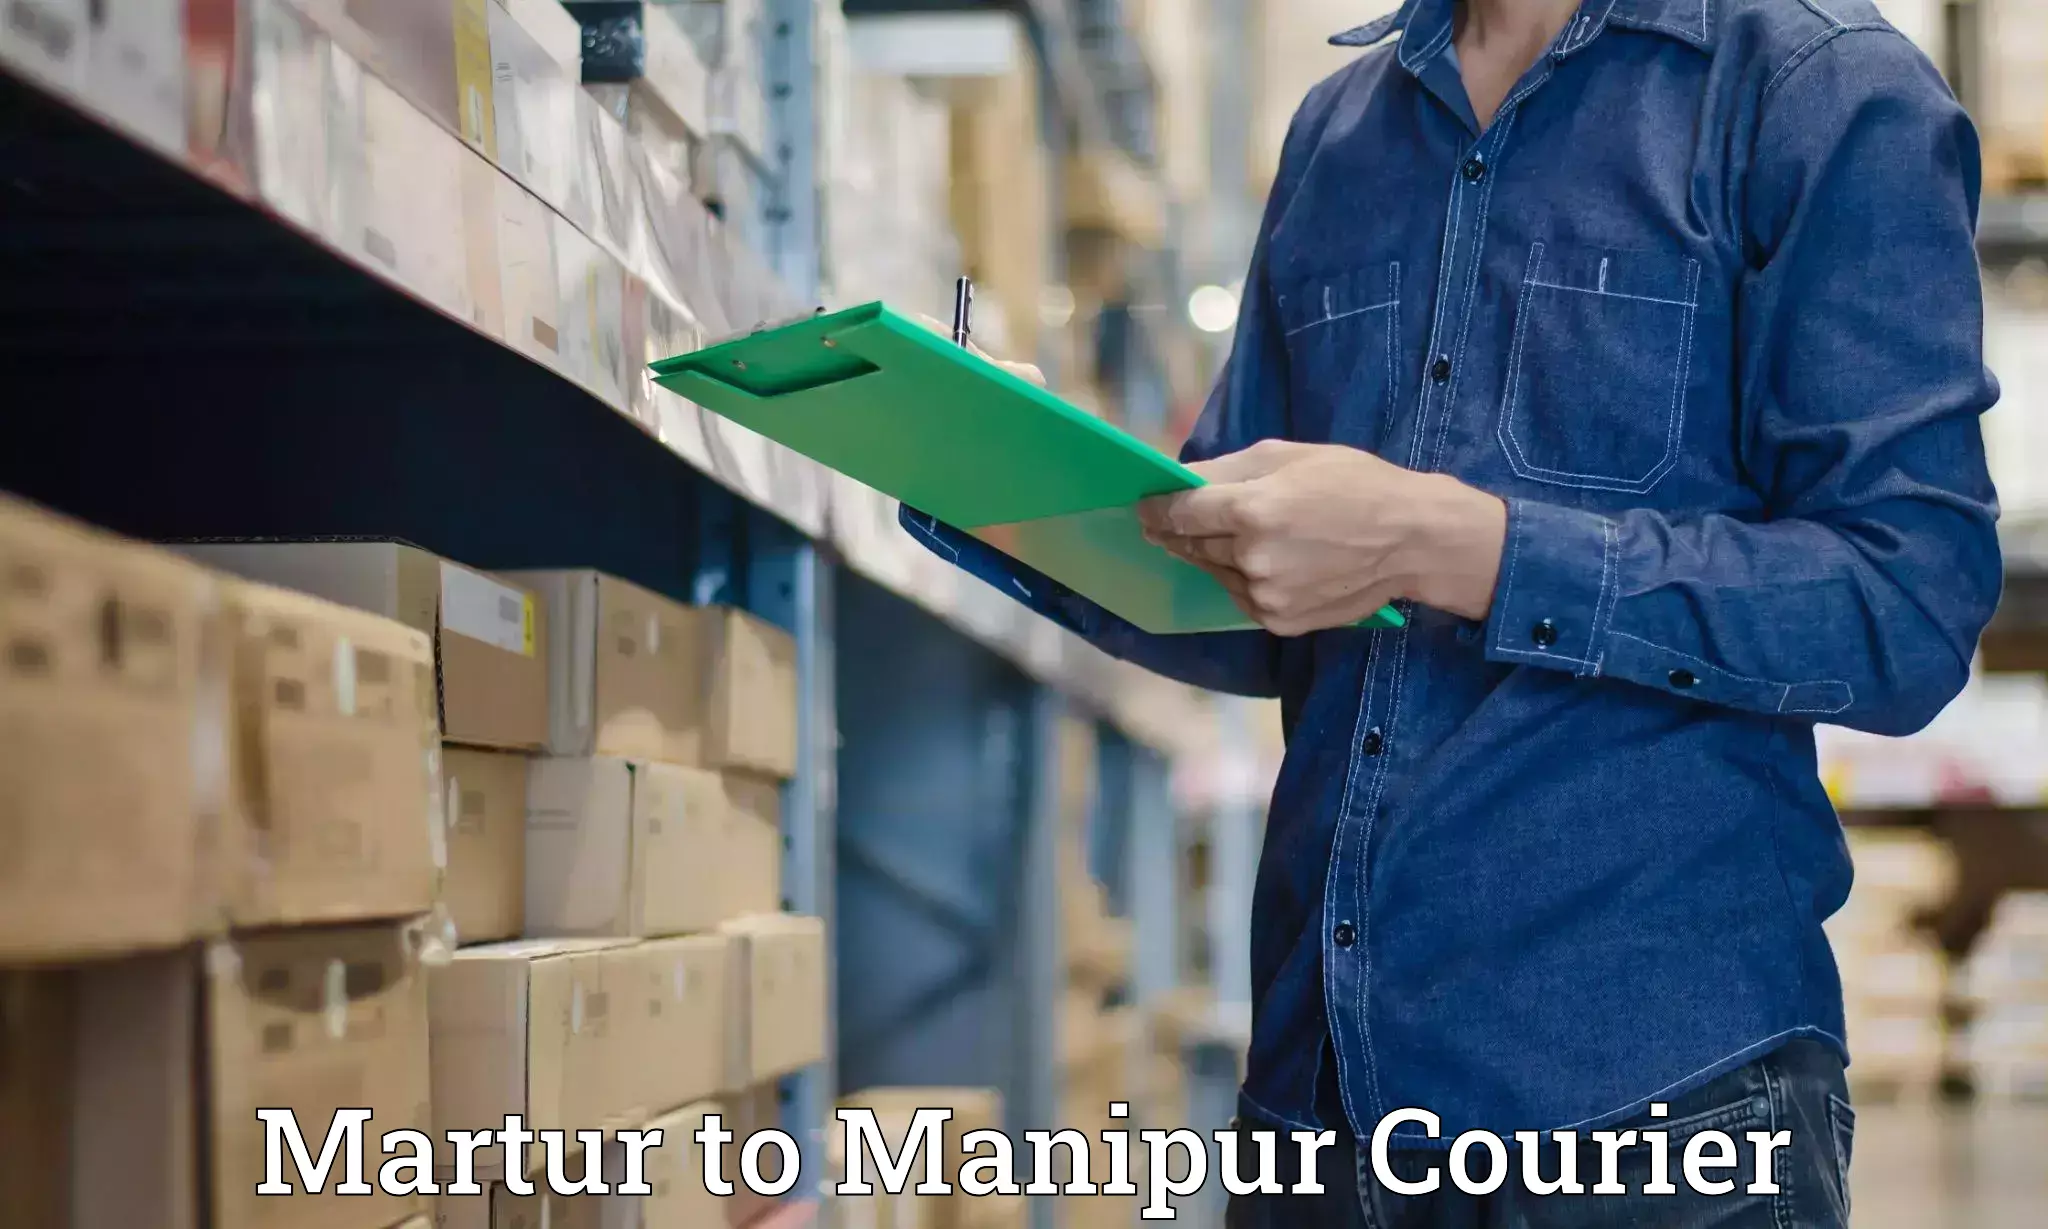 Easy return solutions Martur to Manipur